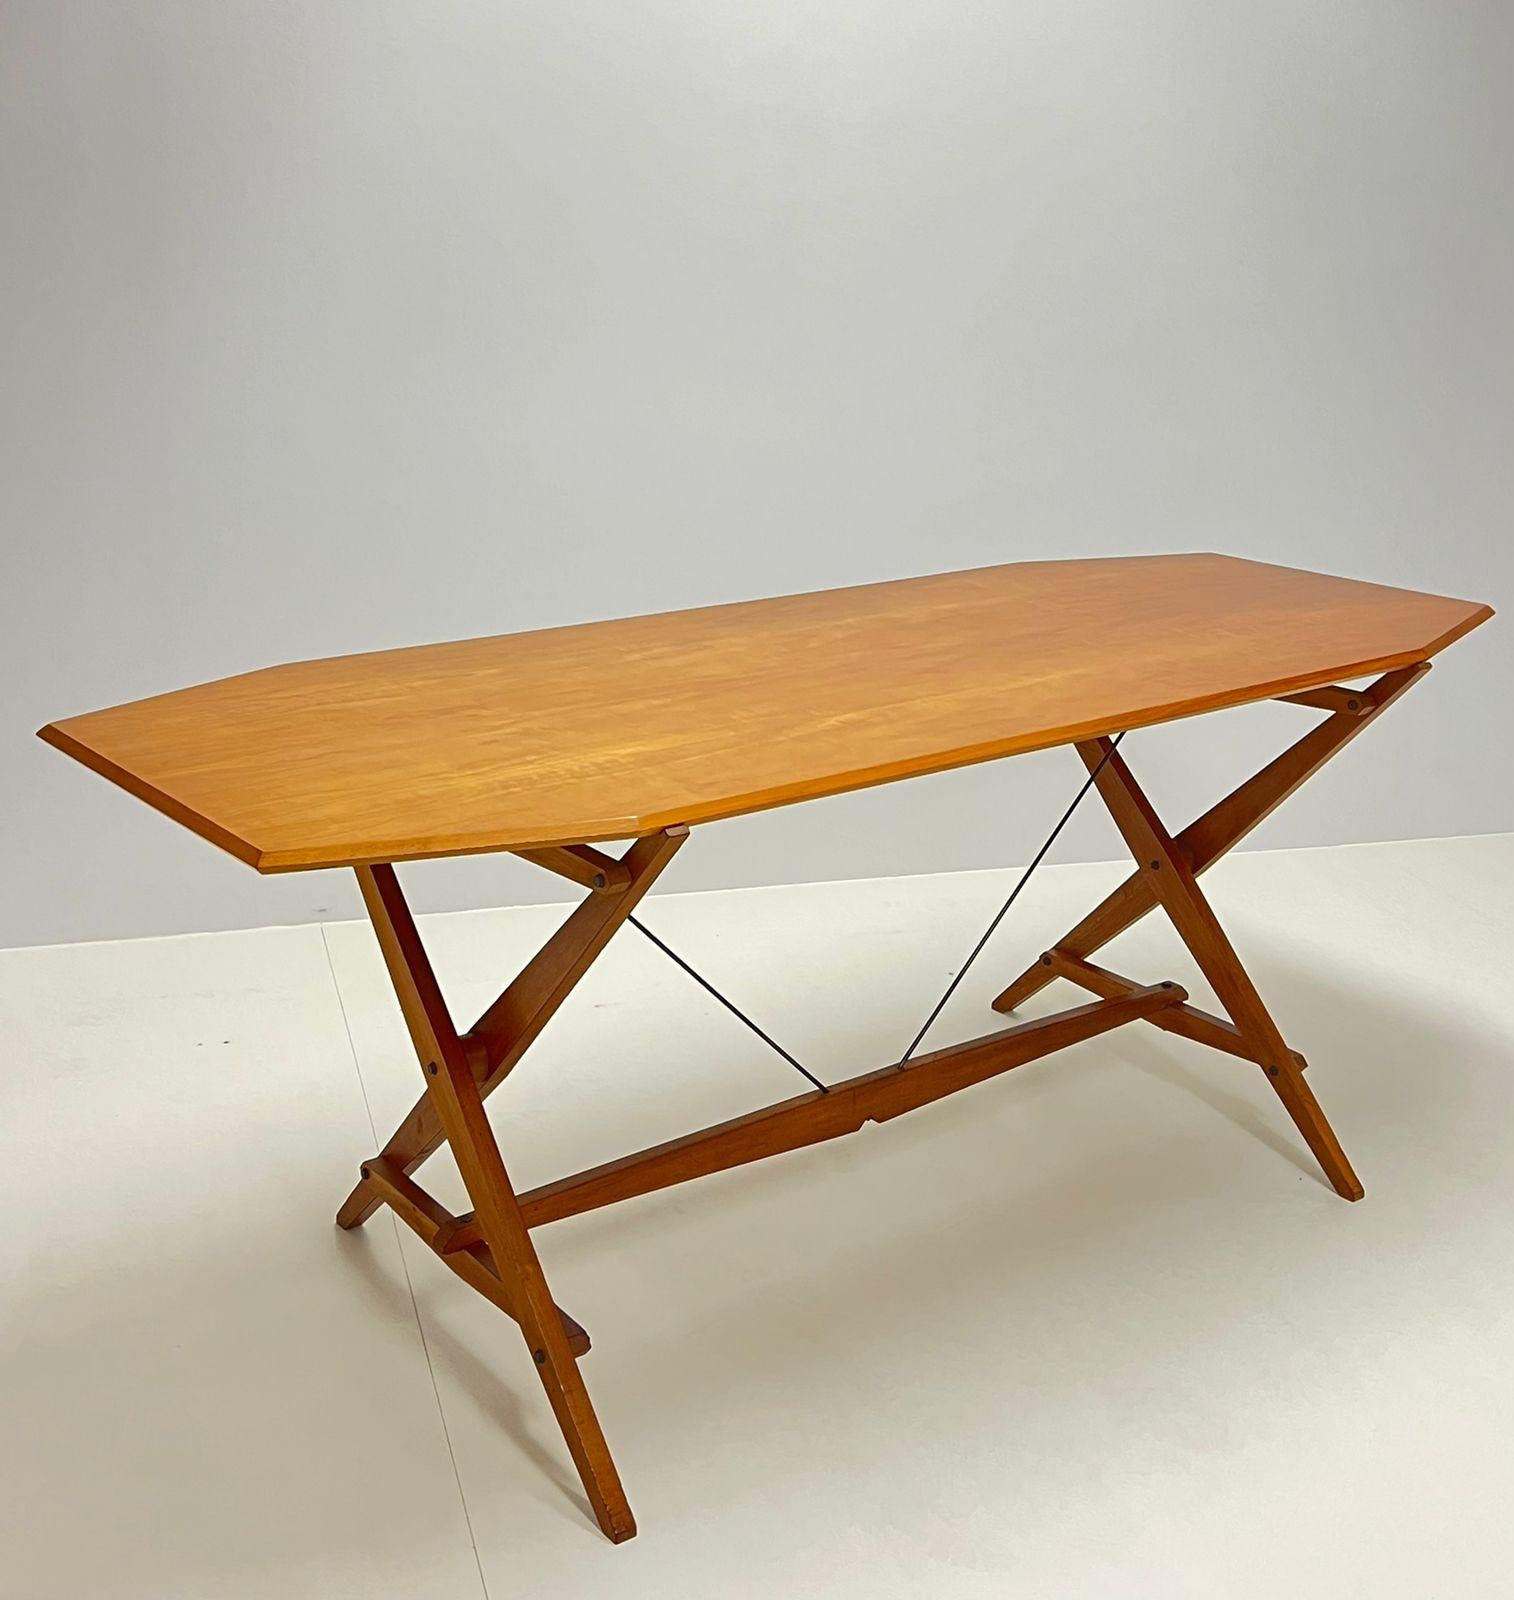 Franco Albini ash dining table Model TL2 'Cavalletto' for Poggi, Italy (Very First Edition), Italy 1950s

This table is the very first edition (the one in ash) of Franco Albini's famous desk-table, which has now become legendary. The structure is